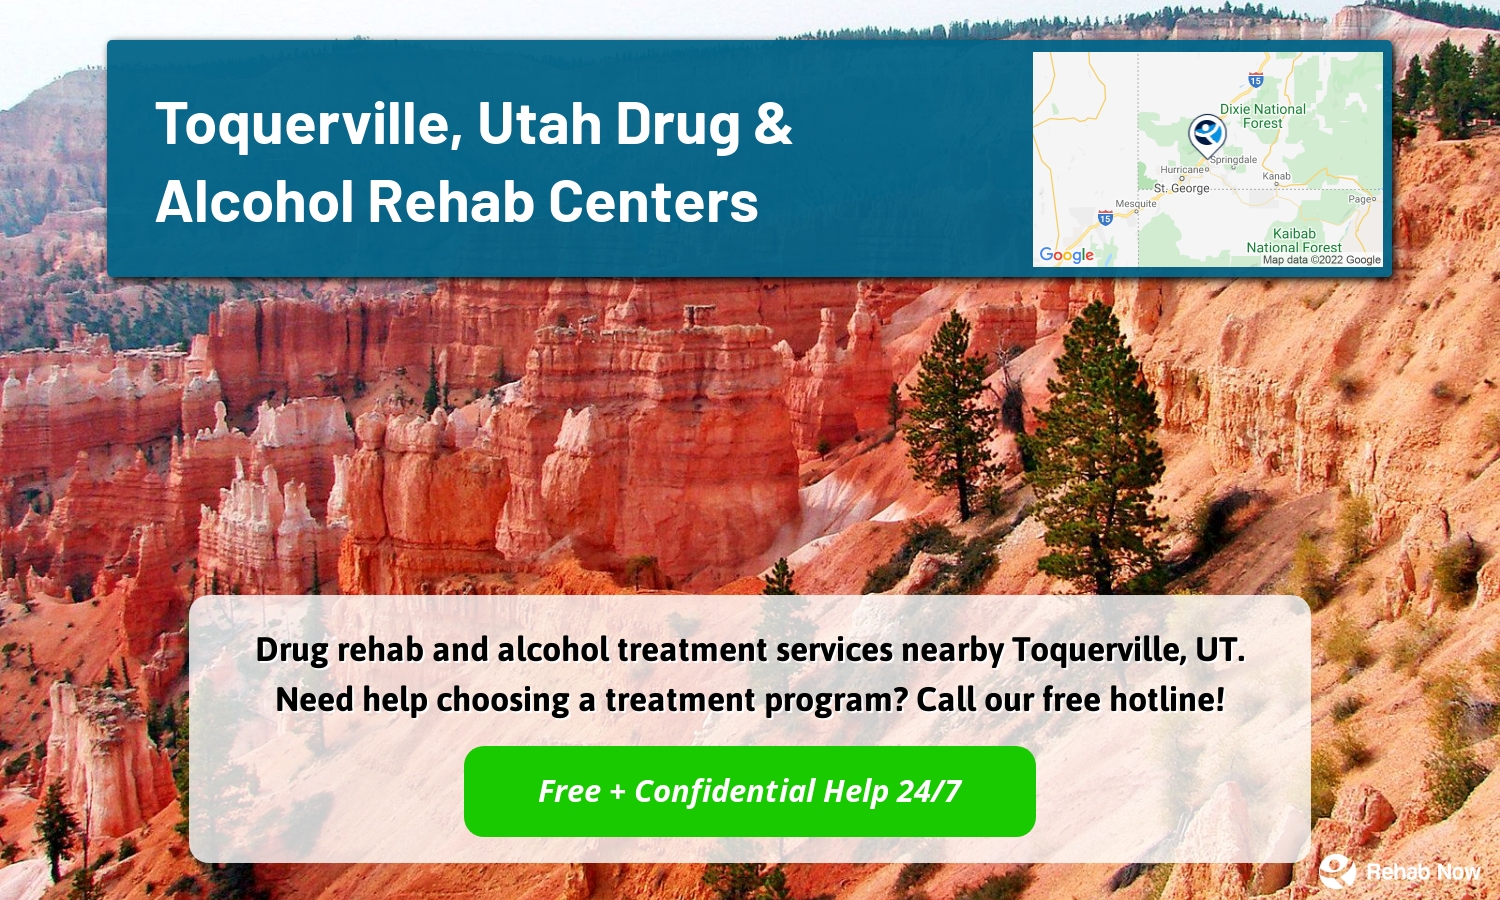 Drug rehab and alcohol treatment services nearby Toquerville, UT. Need help choosing a treatment program? Call our free hotline!